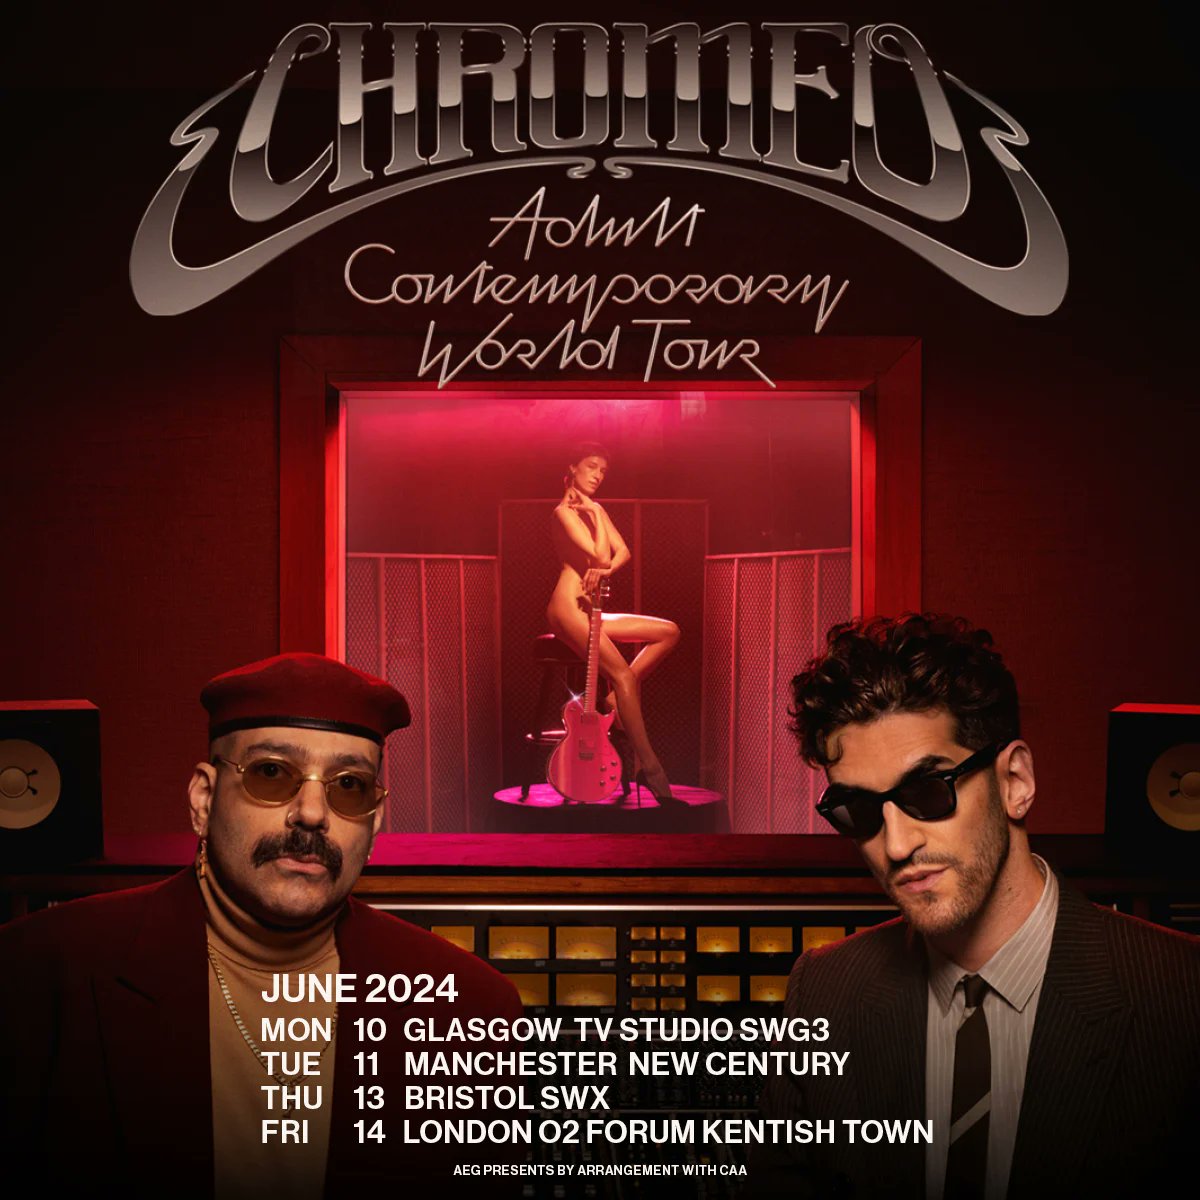 Chromeo Adult Contemporary World Tour in der O2 Forum Kentish Town Tickets